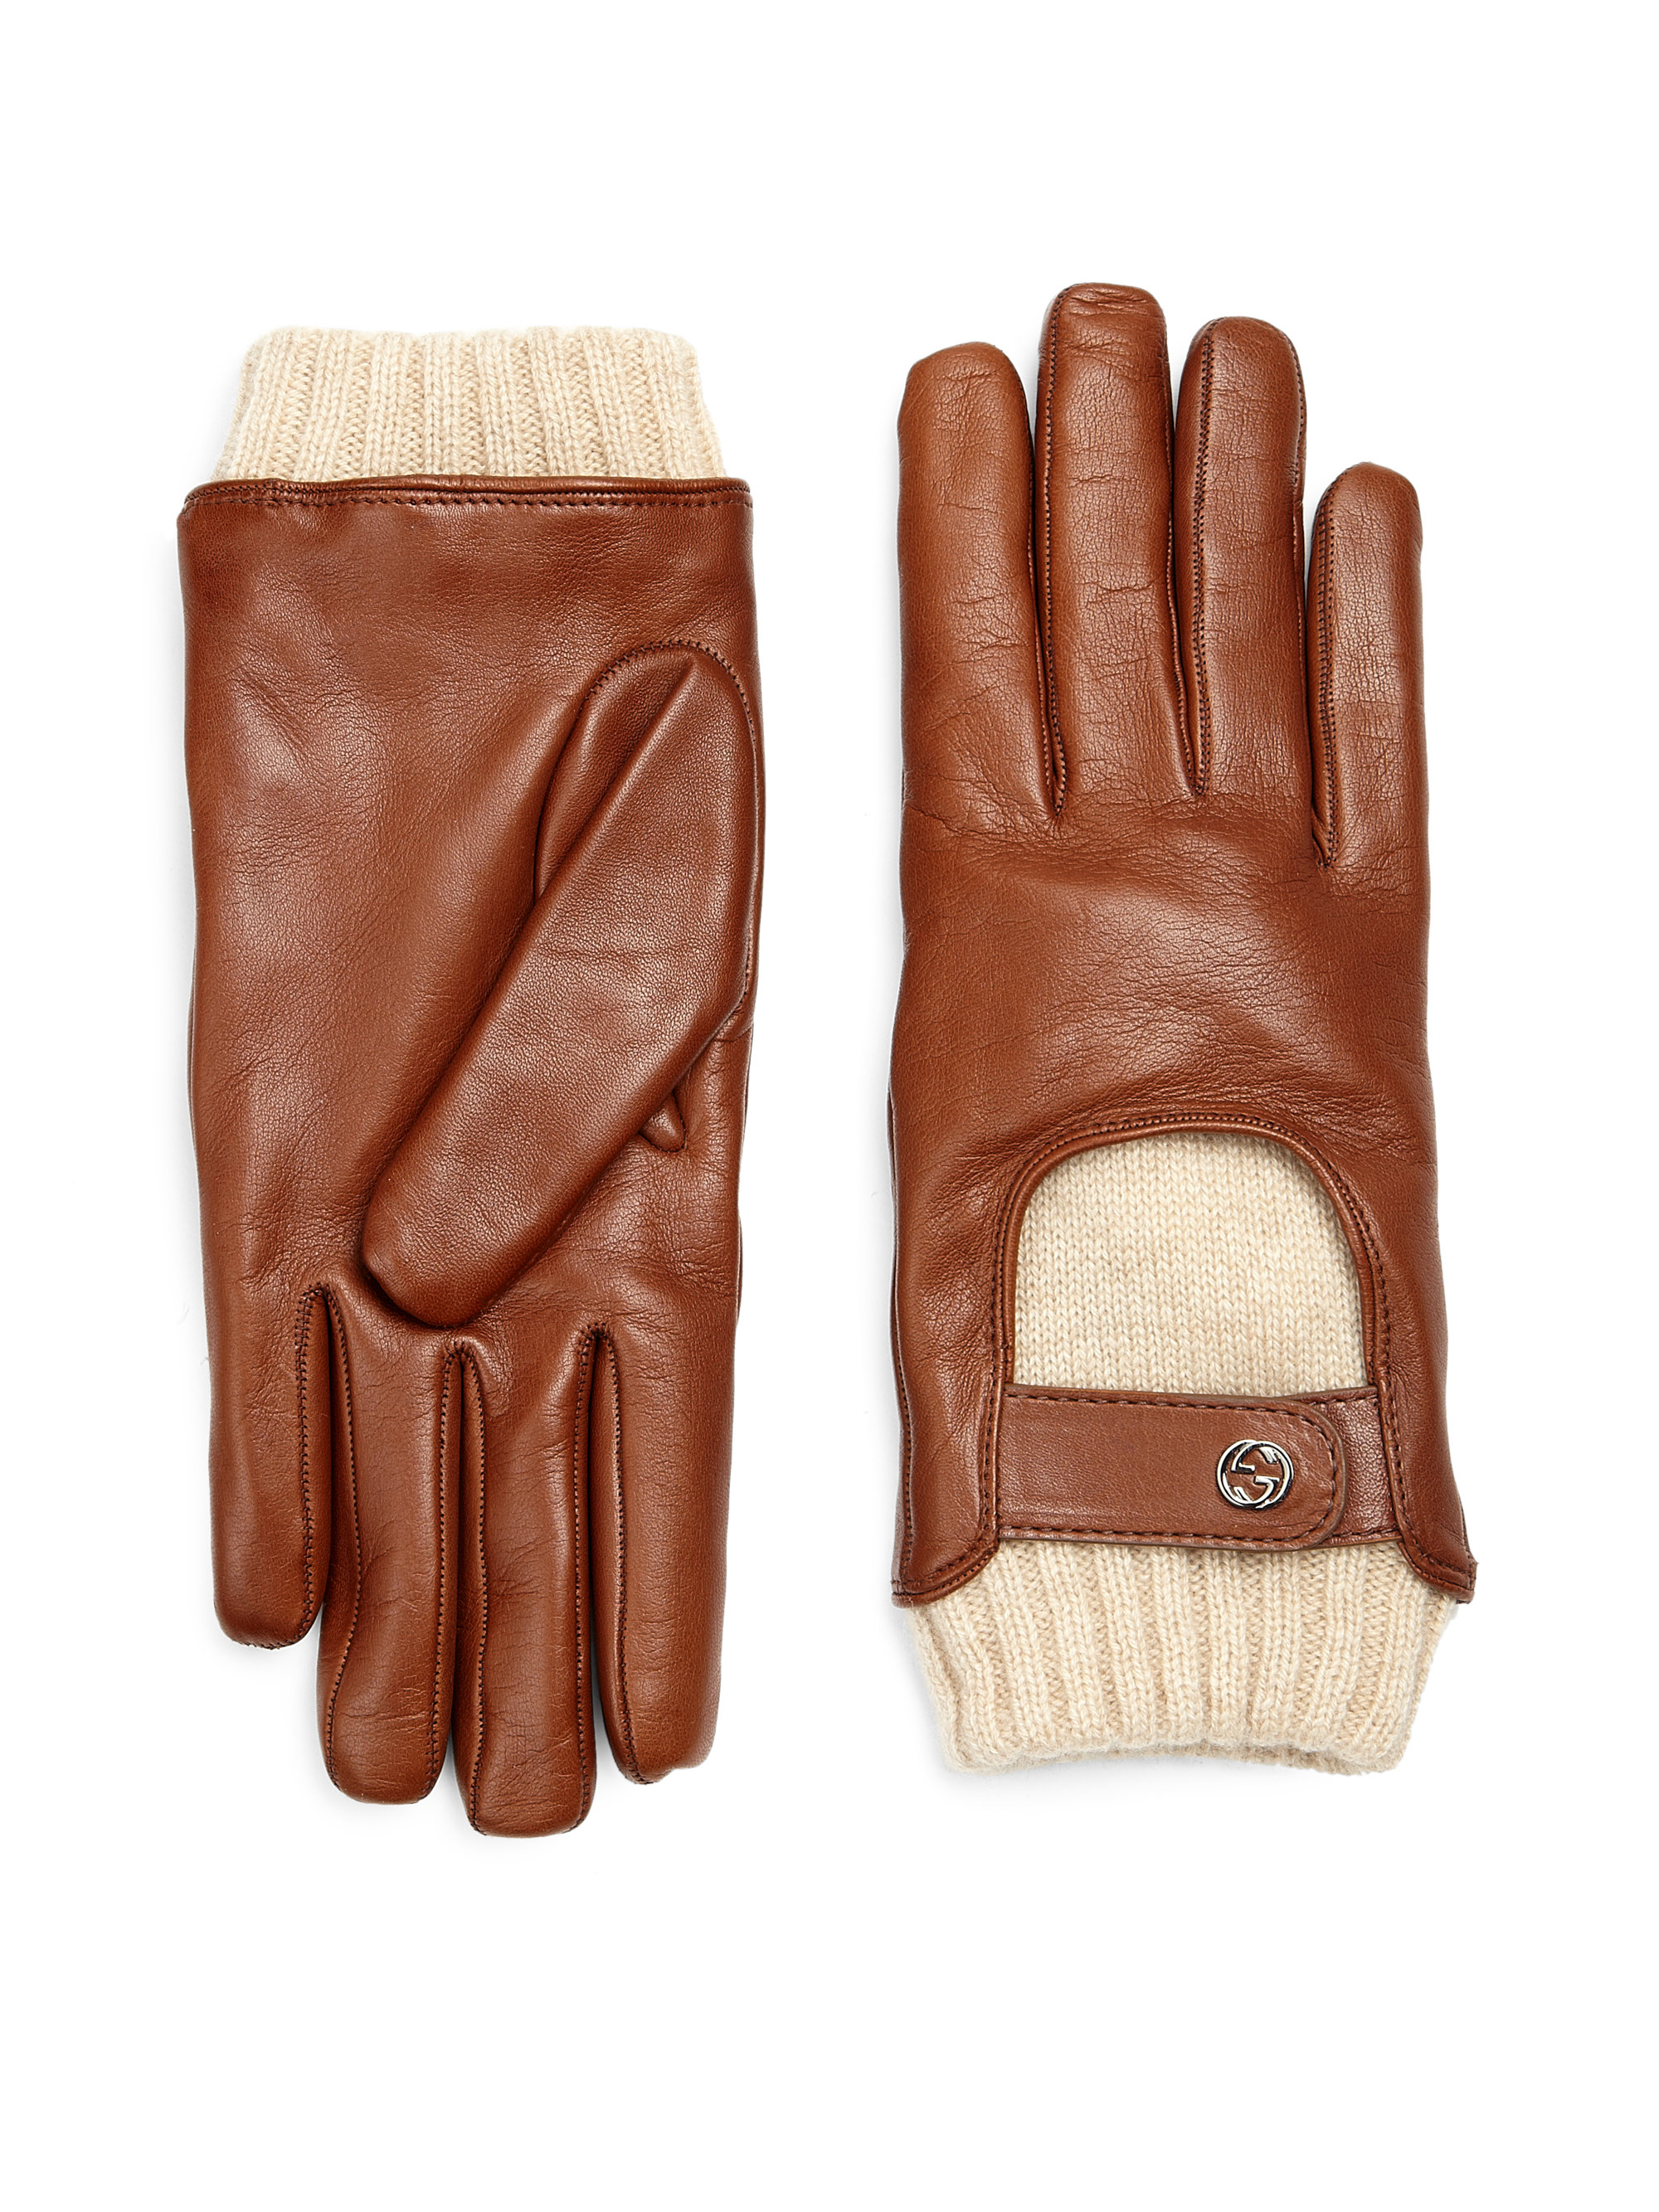 maskulinitet Kaptajn brie Himmel Gucci Leather and Cashmere Driving Gloves in Brown-Tan (Brown) for Men -  Lyst